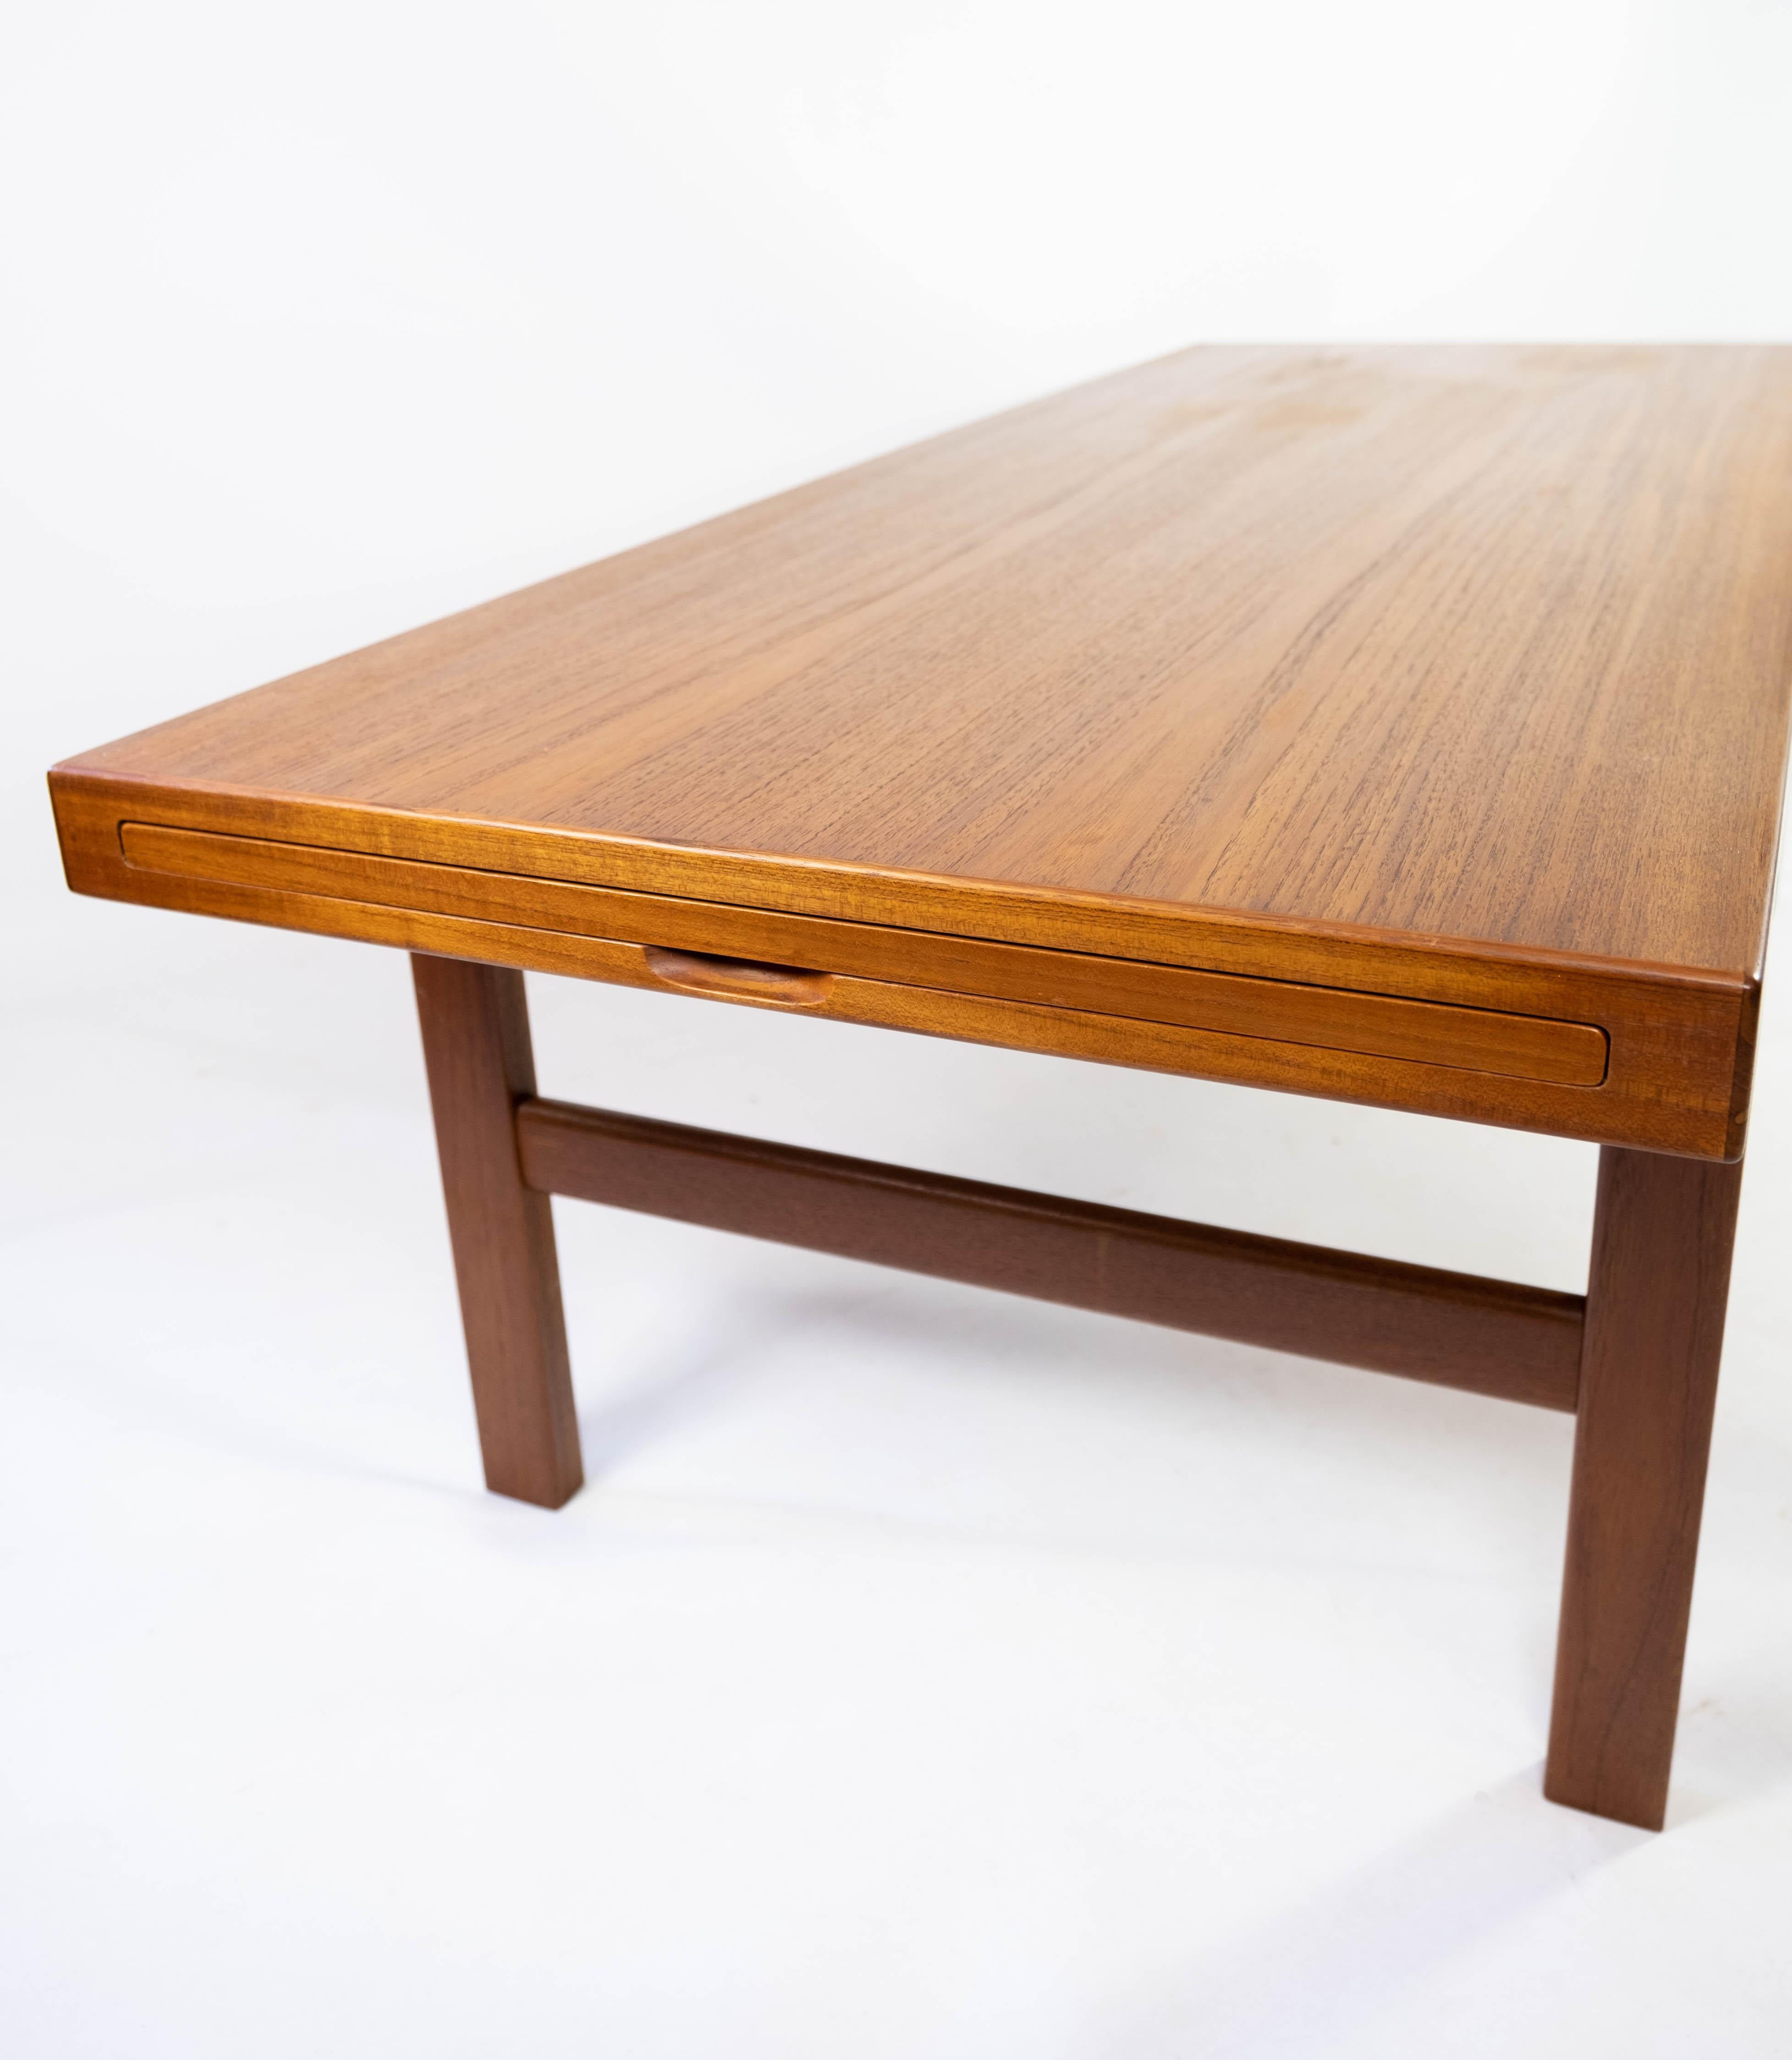 Mid-20th Century Coffee Table Made In Teak With Extension Plate, Danish Design From 1960s For Sale